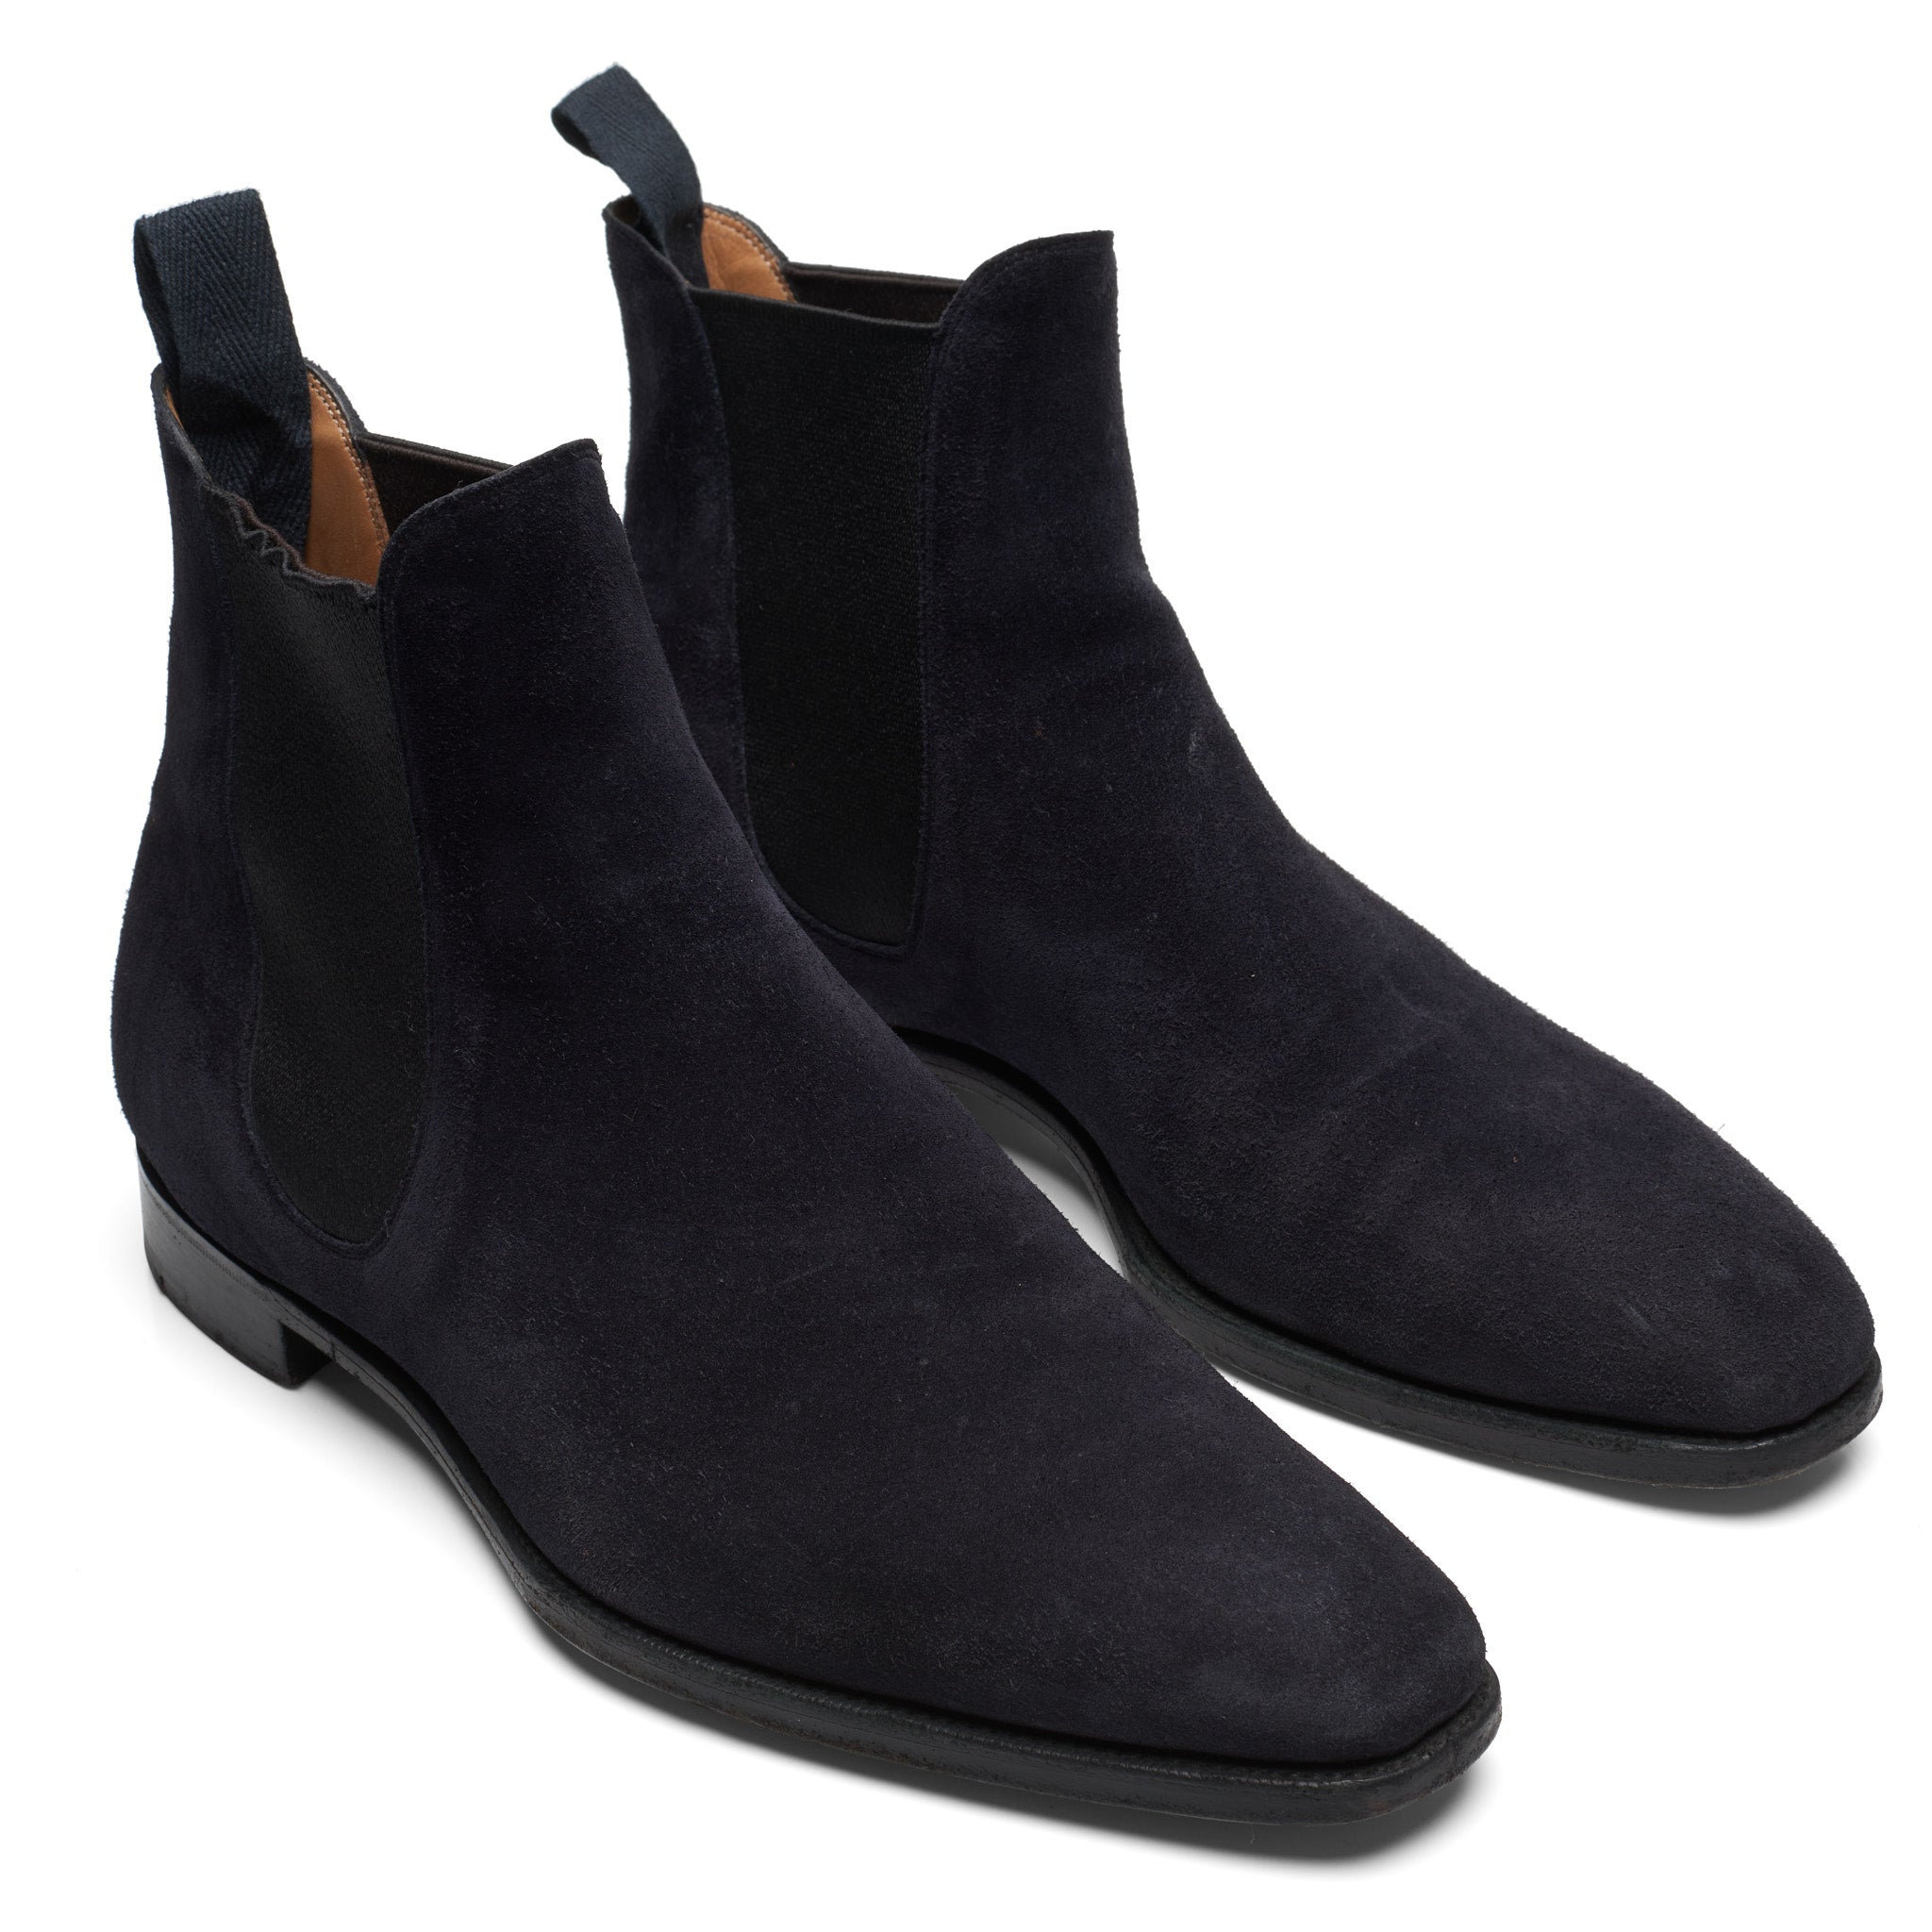 GAZIANO & GIRLING "Burnham" Blue Suede Leather Chelsea Boots UK 8E US 8.5 Last MH71 GAZIANO & GIRLING